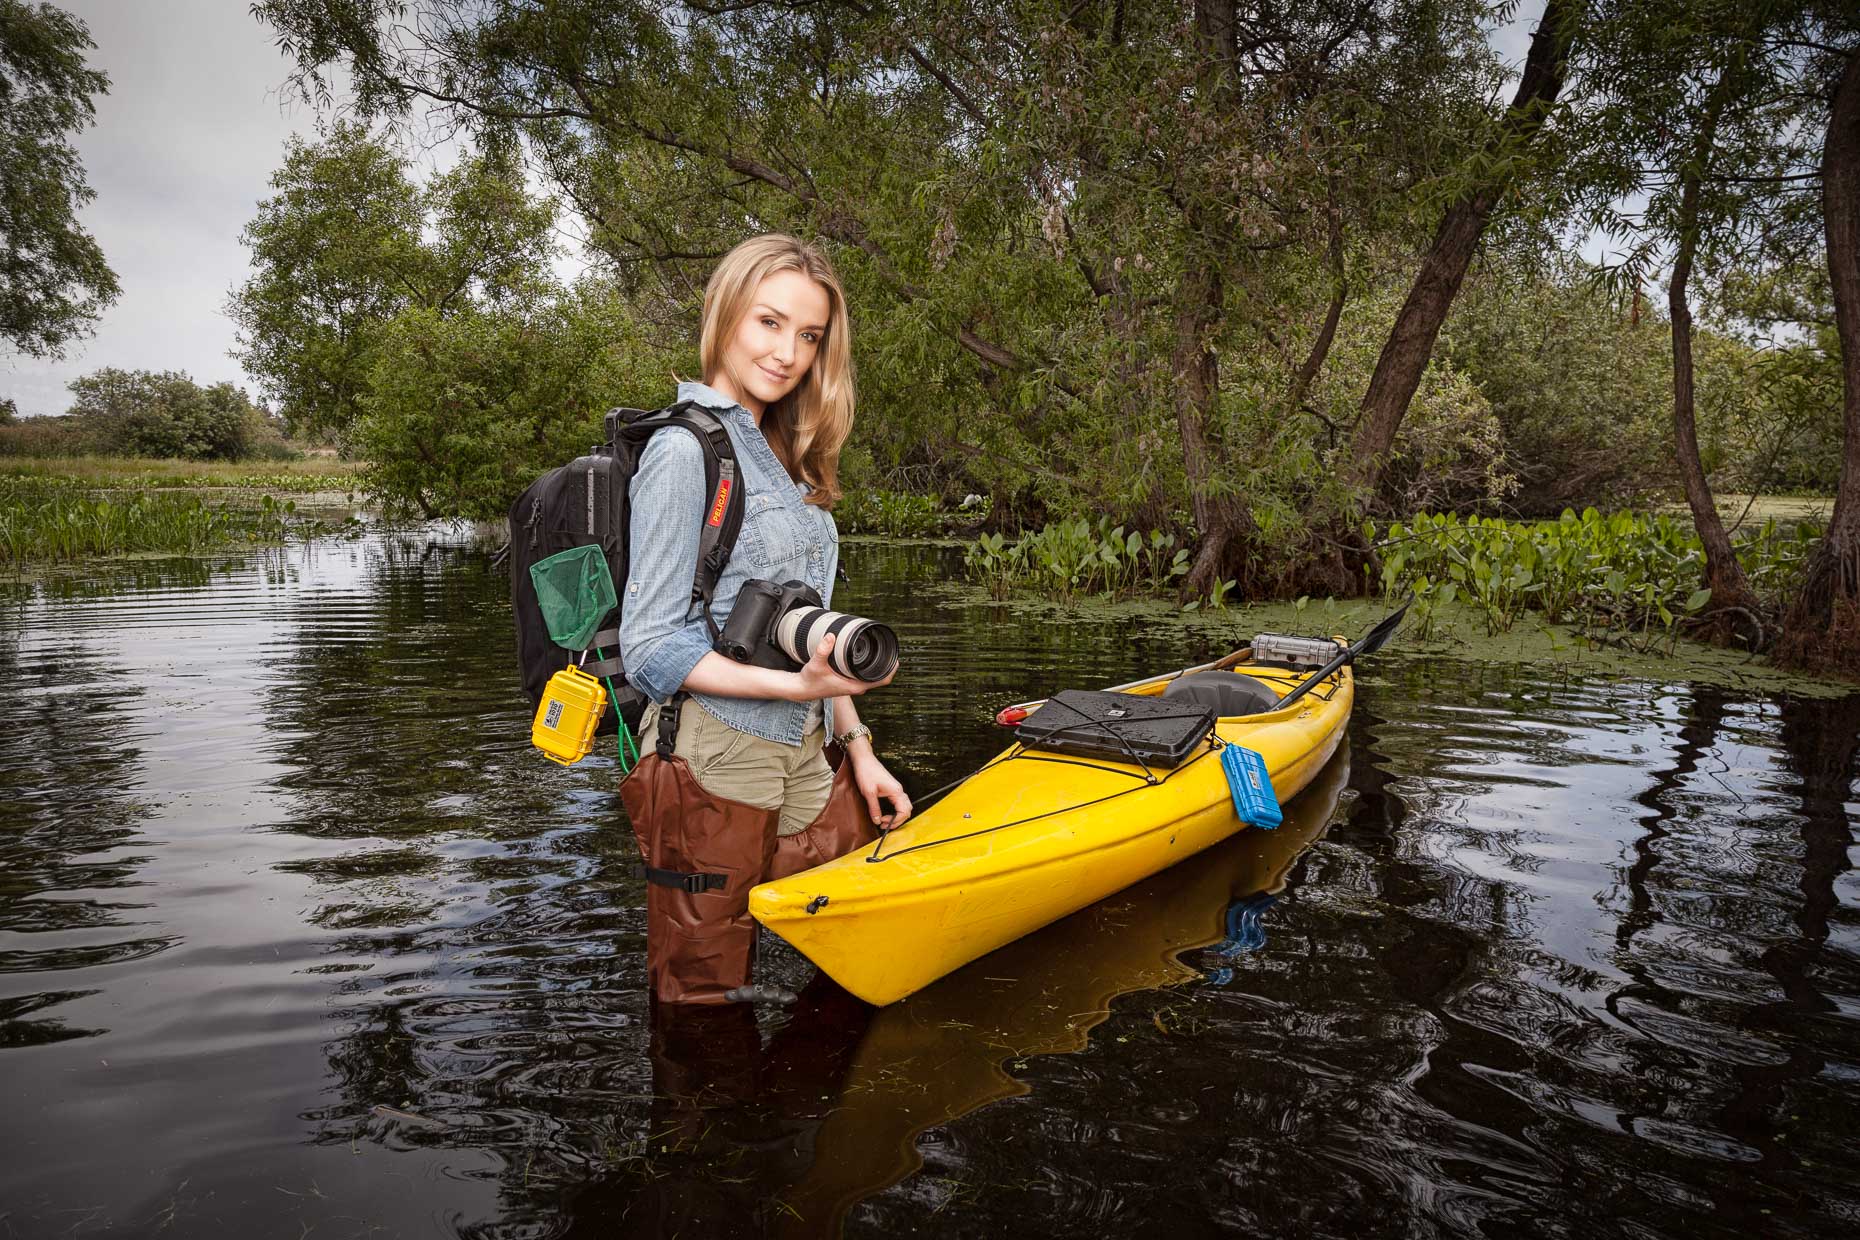 Portrait of woman with camera and kayak standing in water in wetlands. Torrance, California. David Zaitz Photography.